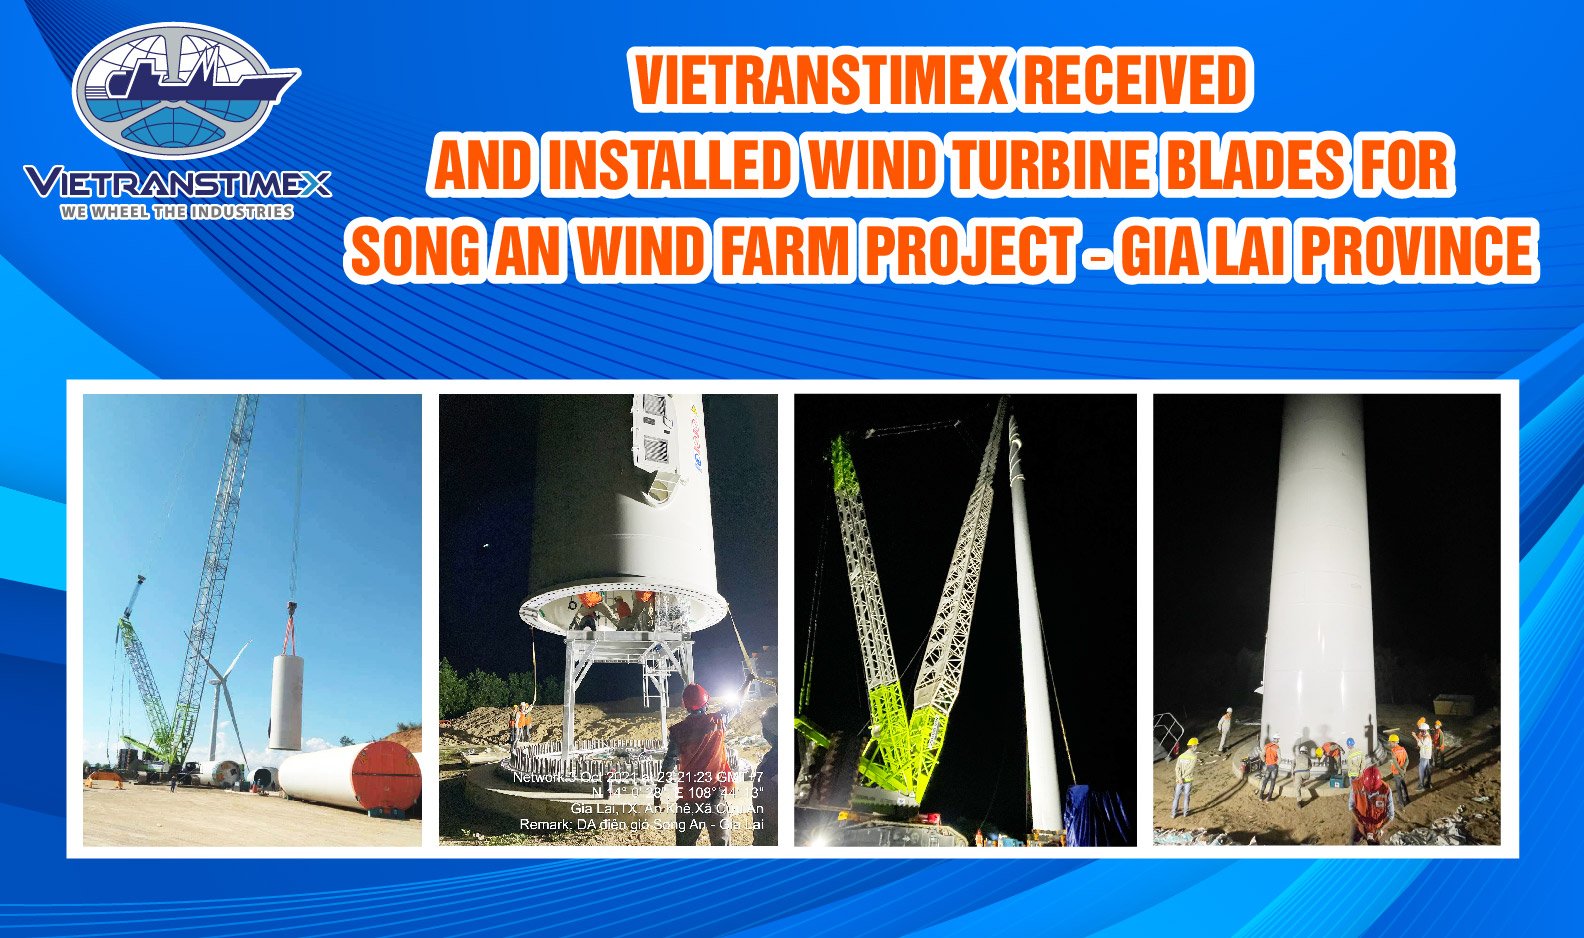 Song An Wind Farm Project – Gia Lai Province